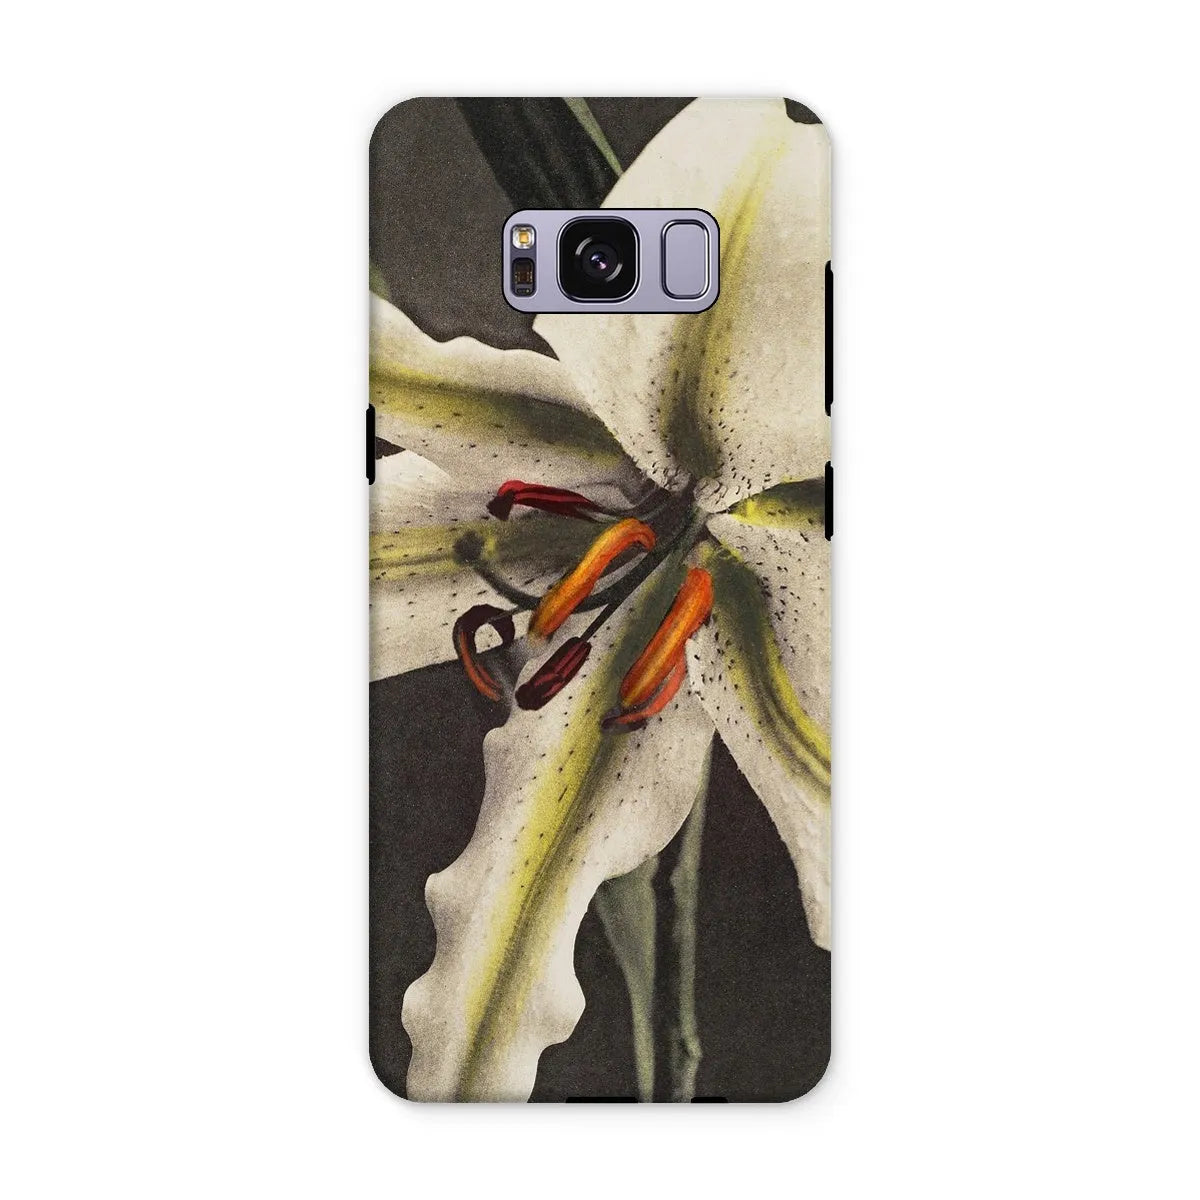 Lily By Kazumasa Ogawa Art Phone Case - Samsung Galaxy S8 Plus / Matte - Mobile Phone Cases - Aesthetic Art